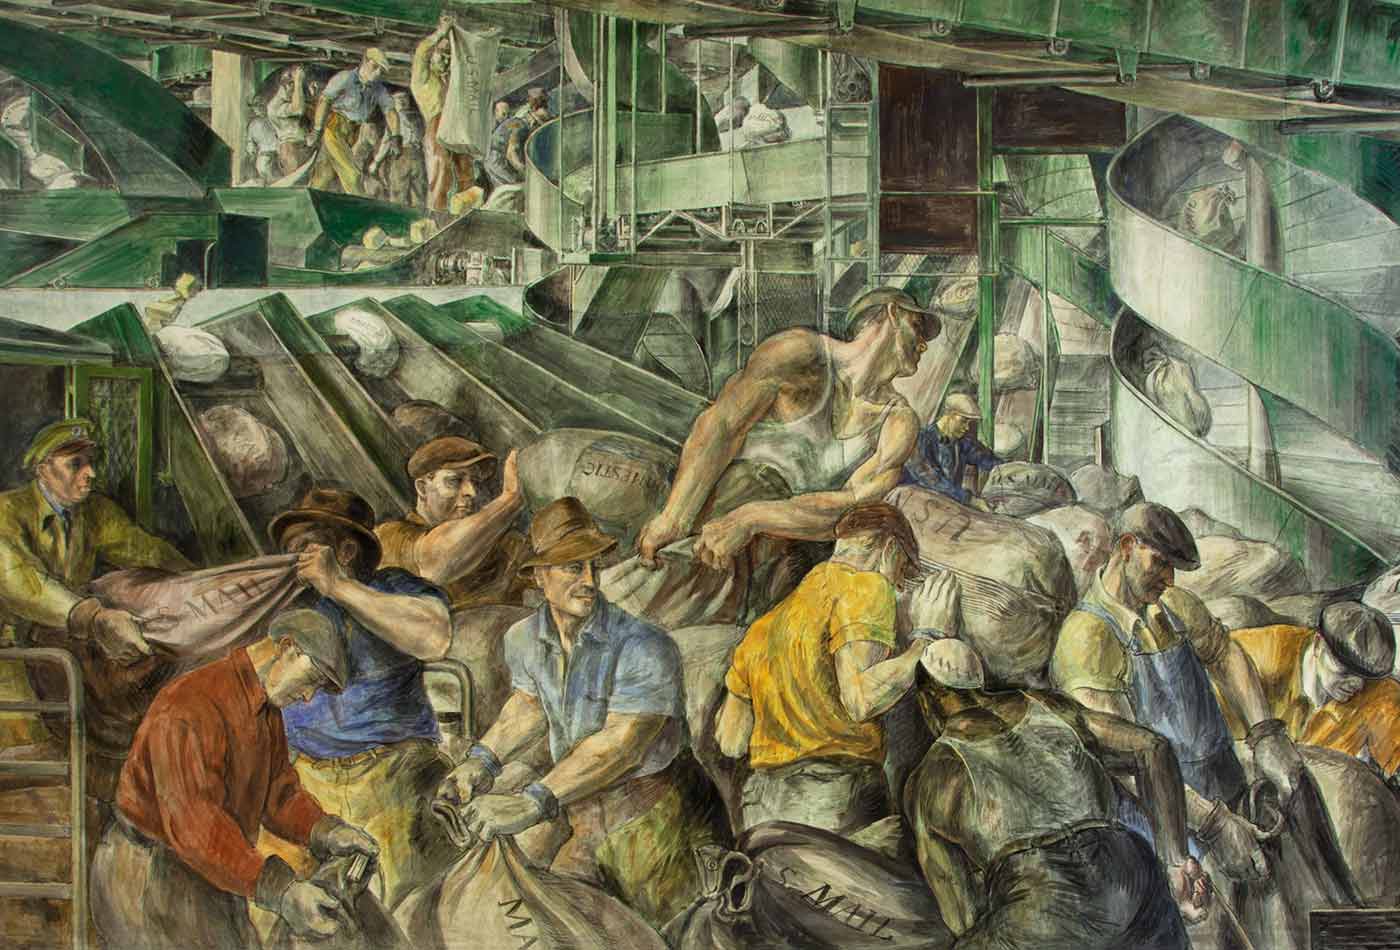 Photograph of mural "Sorting the Mail" by Reginald Marsh at the Ariel Rios Federal Building, Washington, D.C.